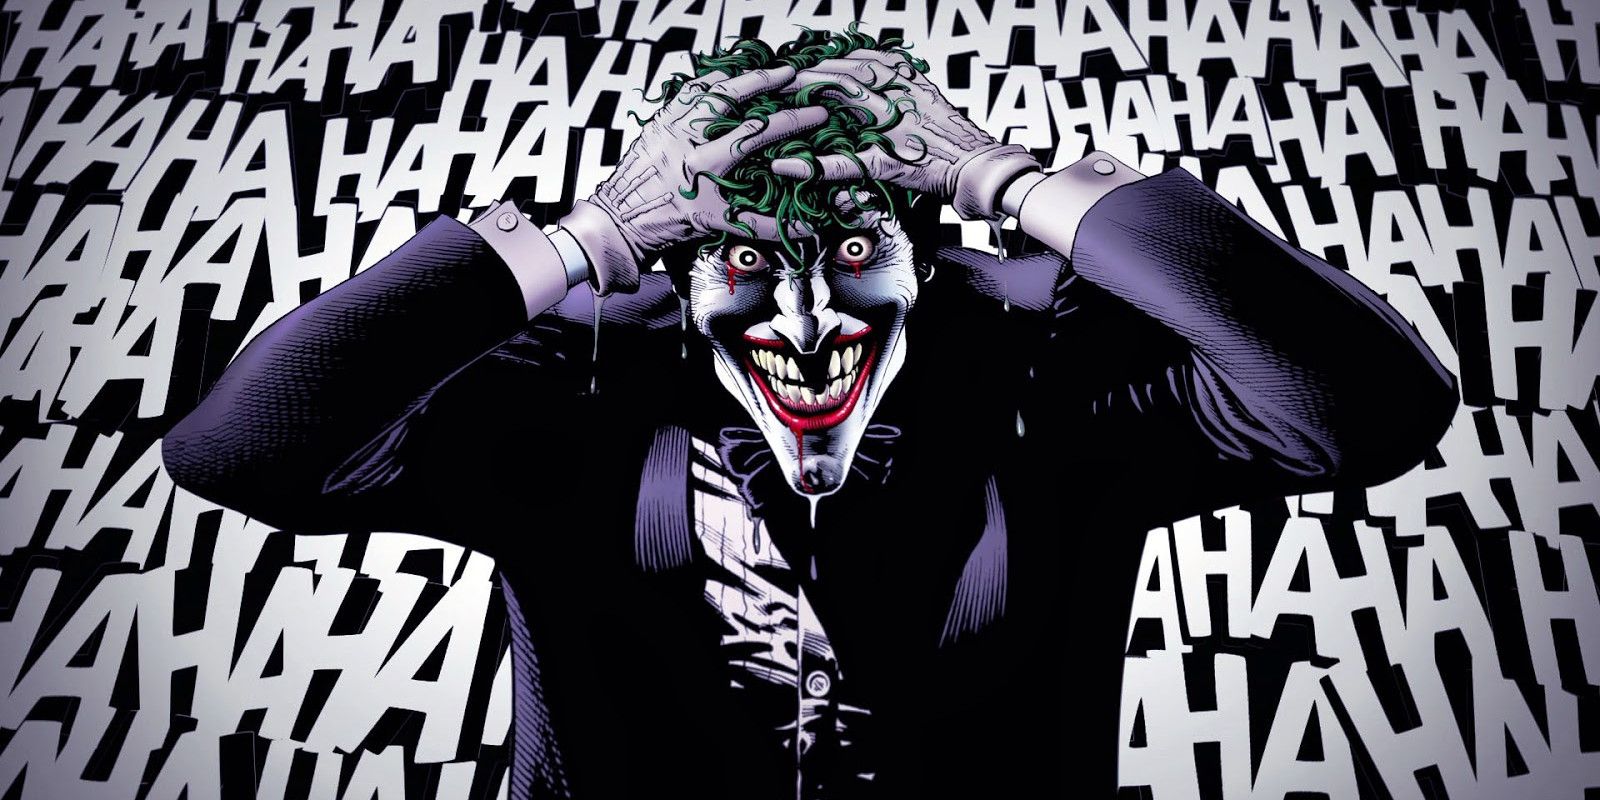 Joker laughing and clutching his green hair in The Killing Joke.